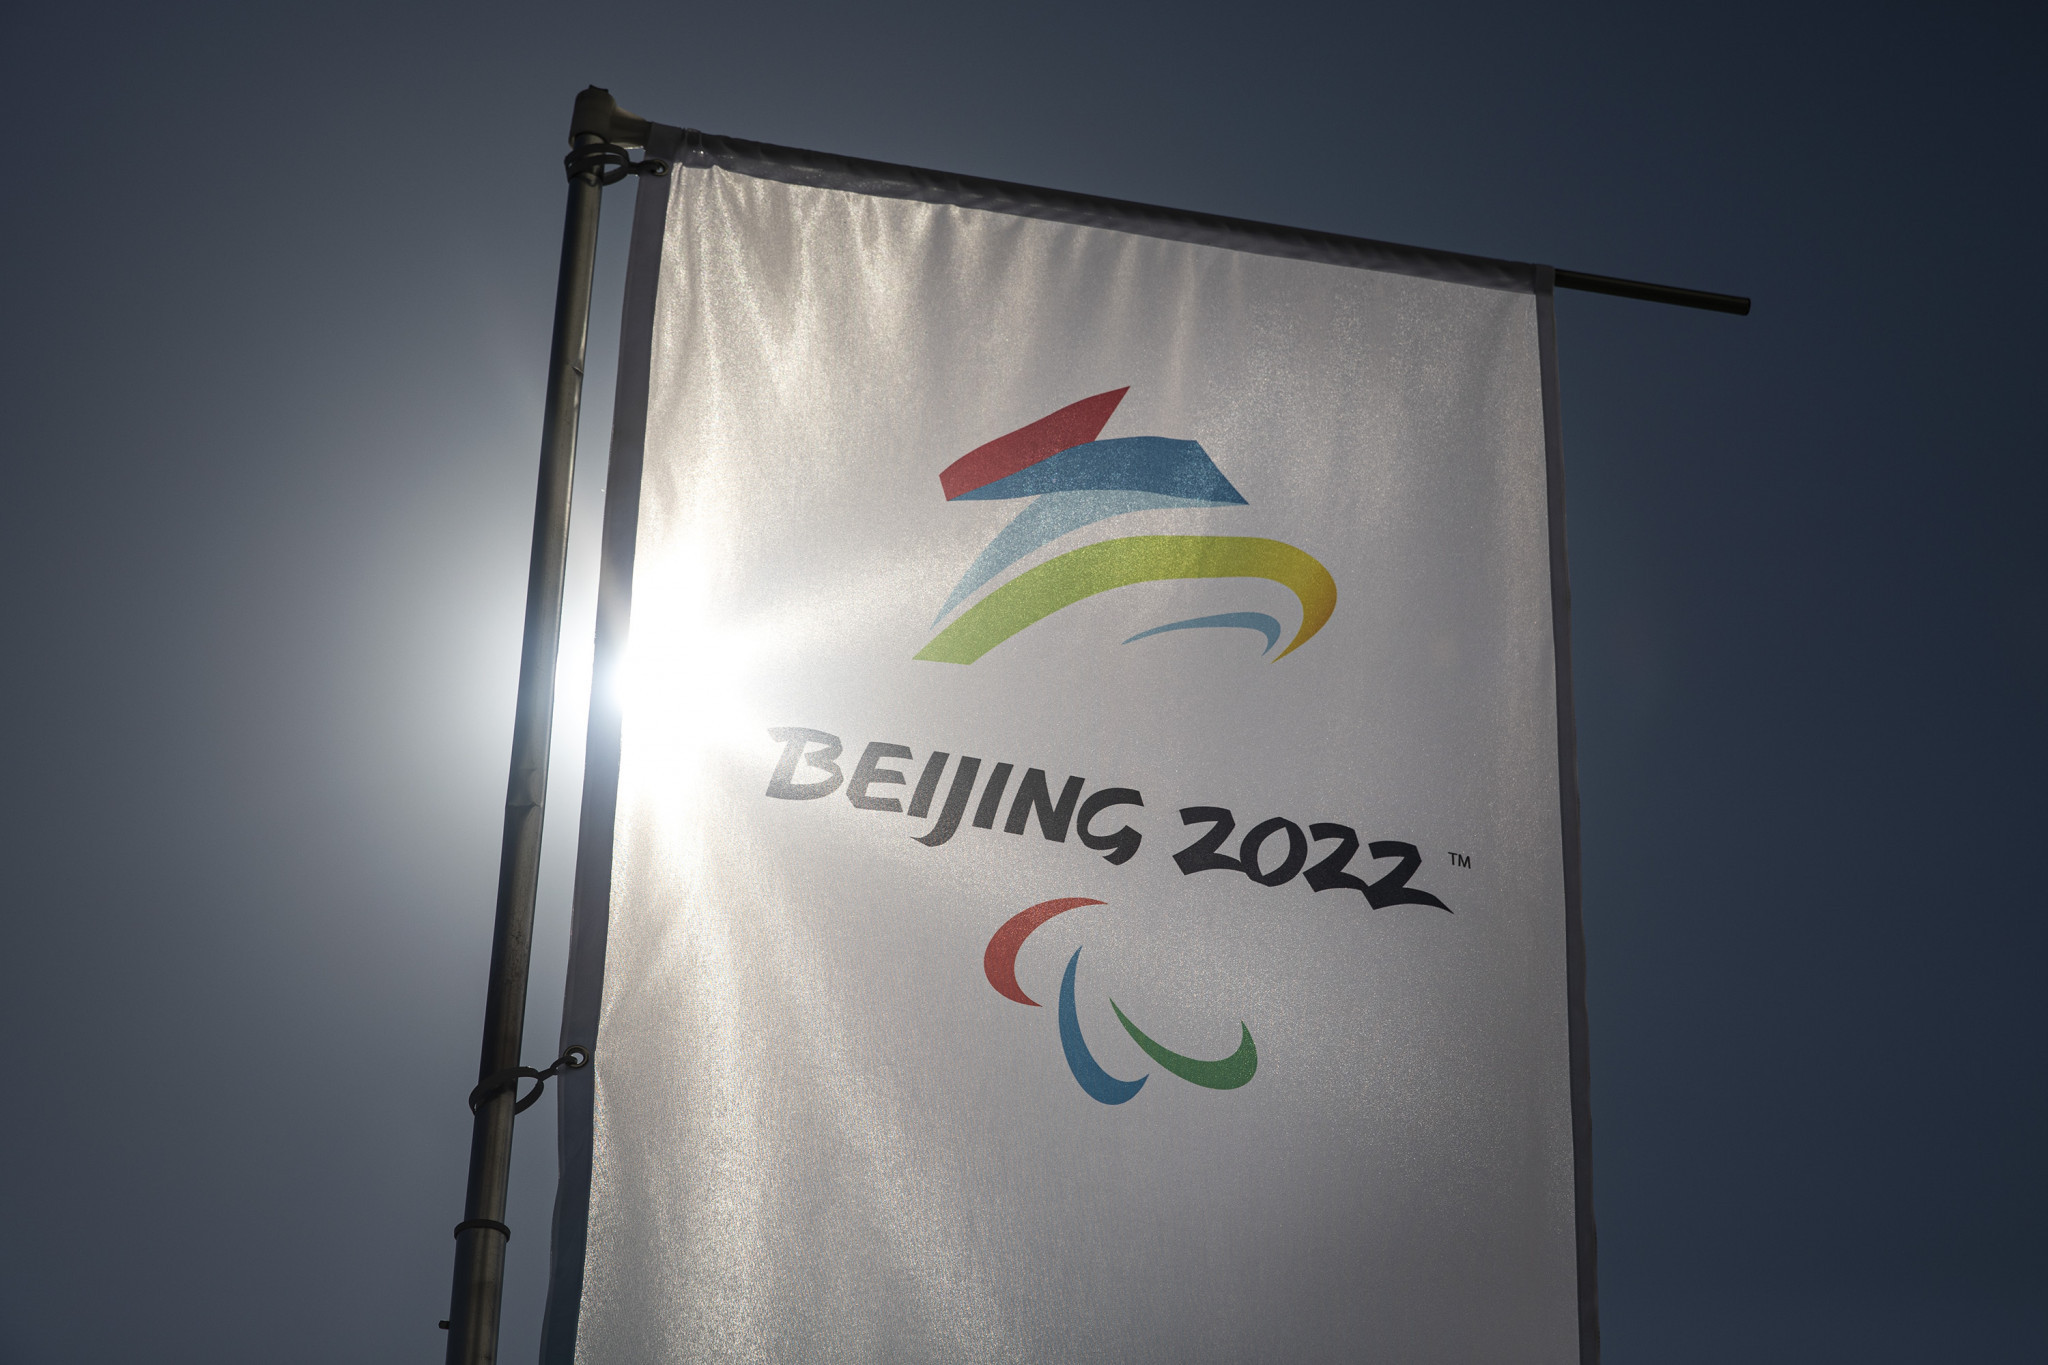 The stage is almost set for the Beijing 2022 Paralympic Games ©Getty Images